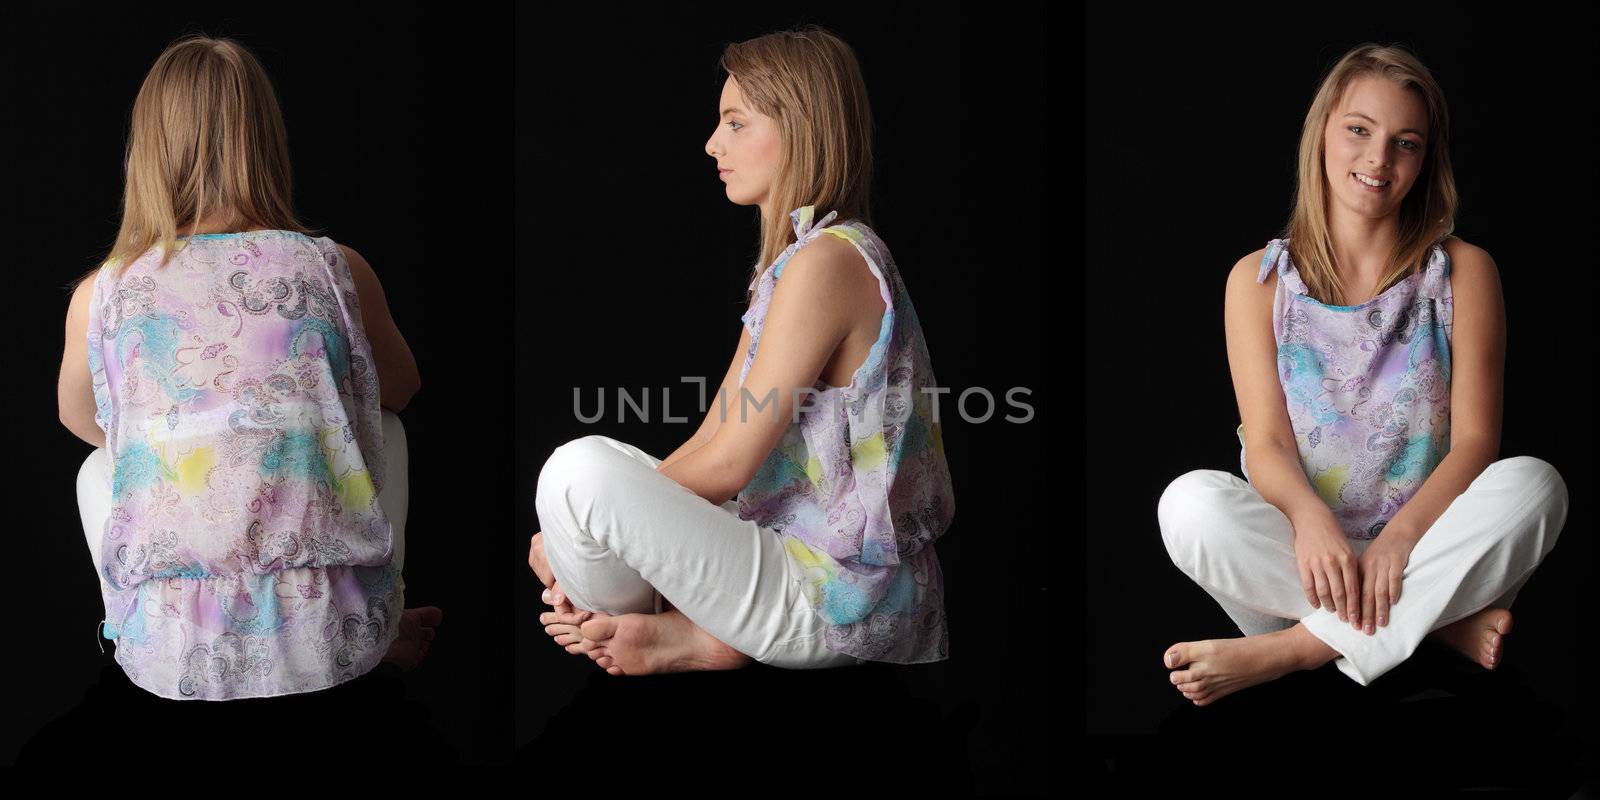 Young beautiful woman sitting against black background - front, side and back shoot